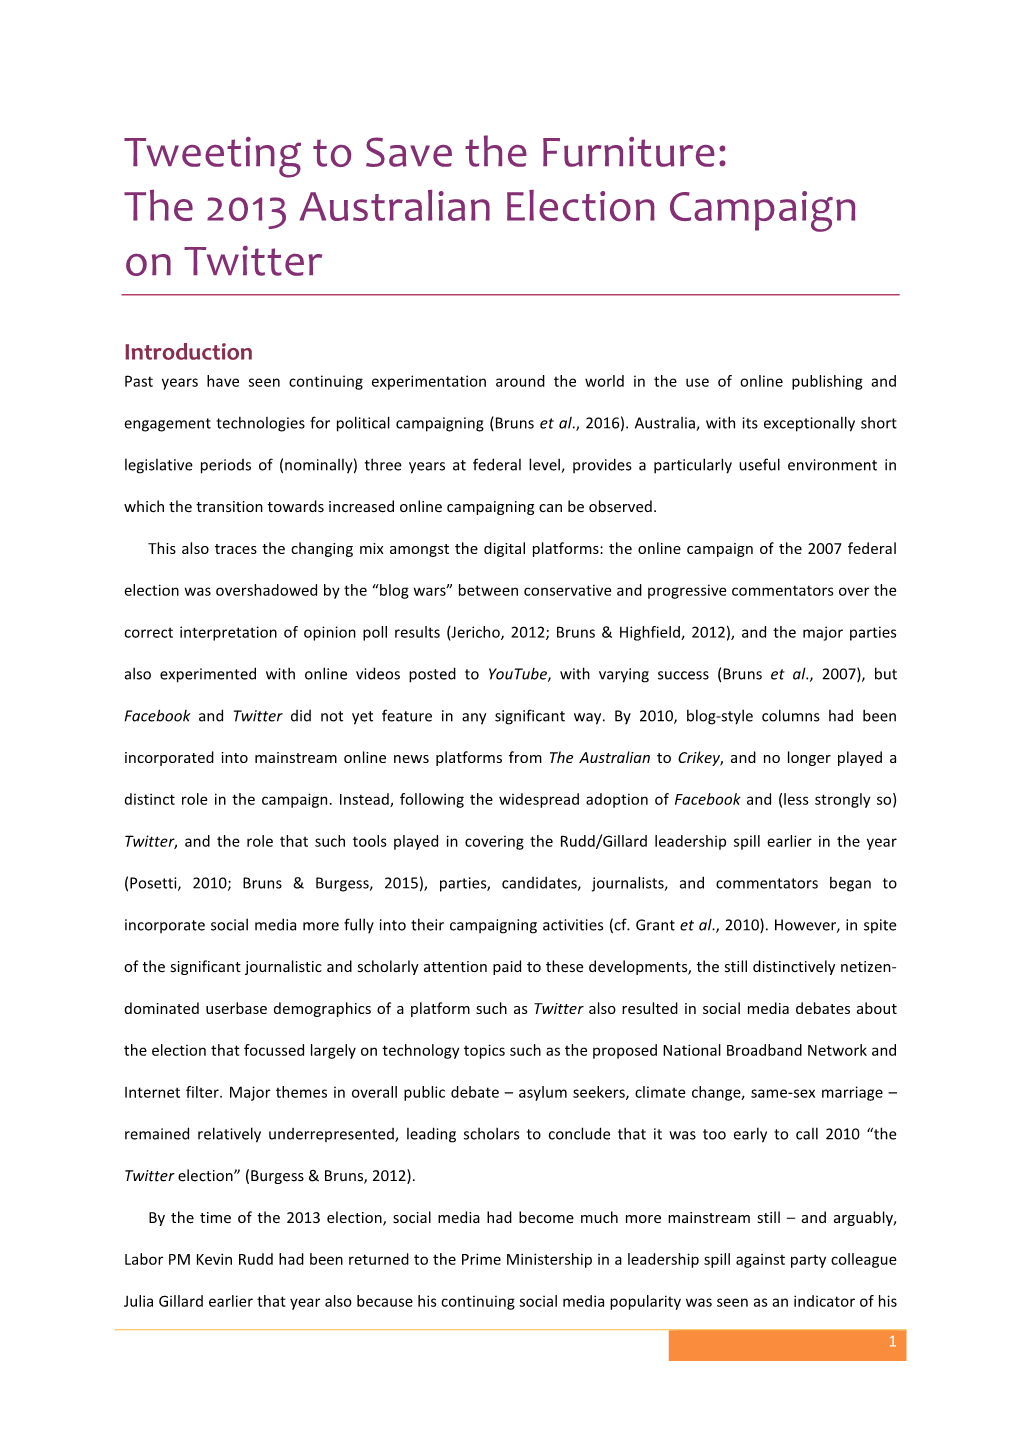 Tweeting to Save the Furniture: the 2013 Australian Election Campaign on Twitter